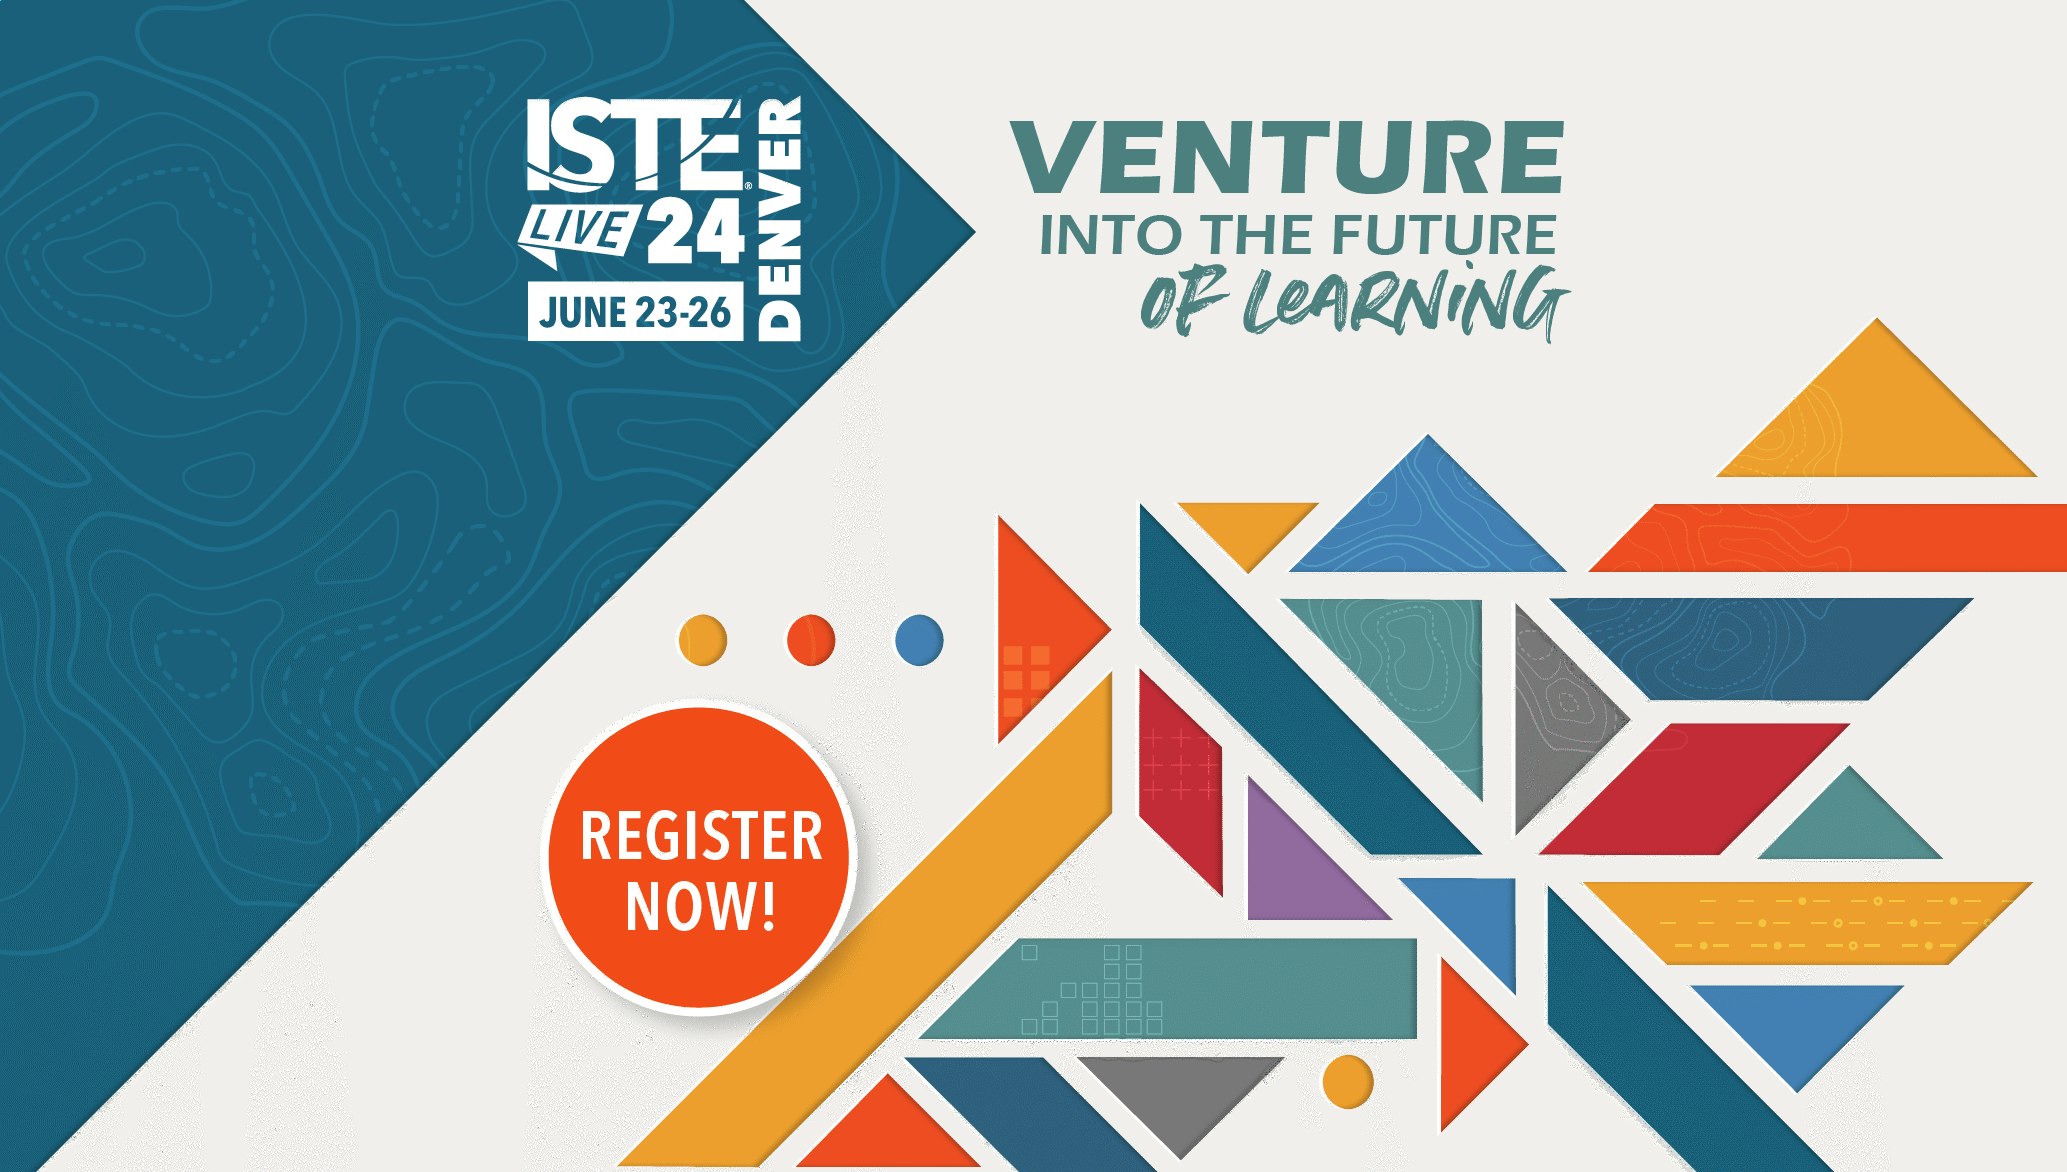 ISTE ISTELive 24 Conference & Expo